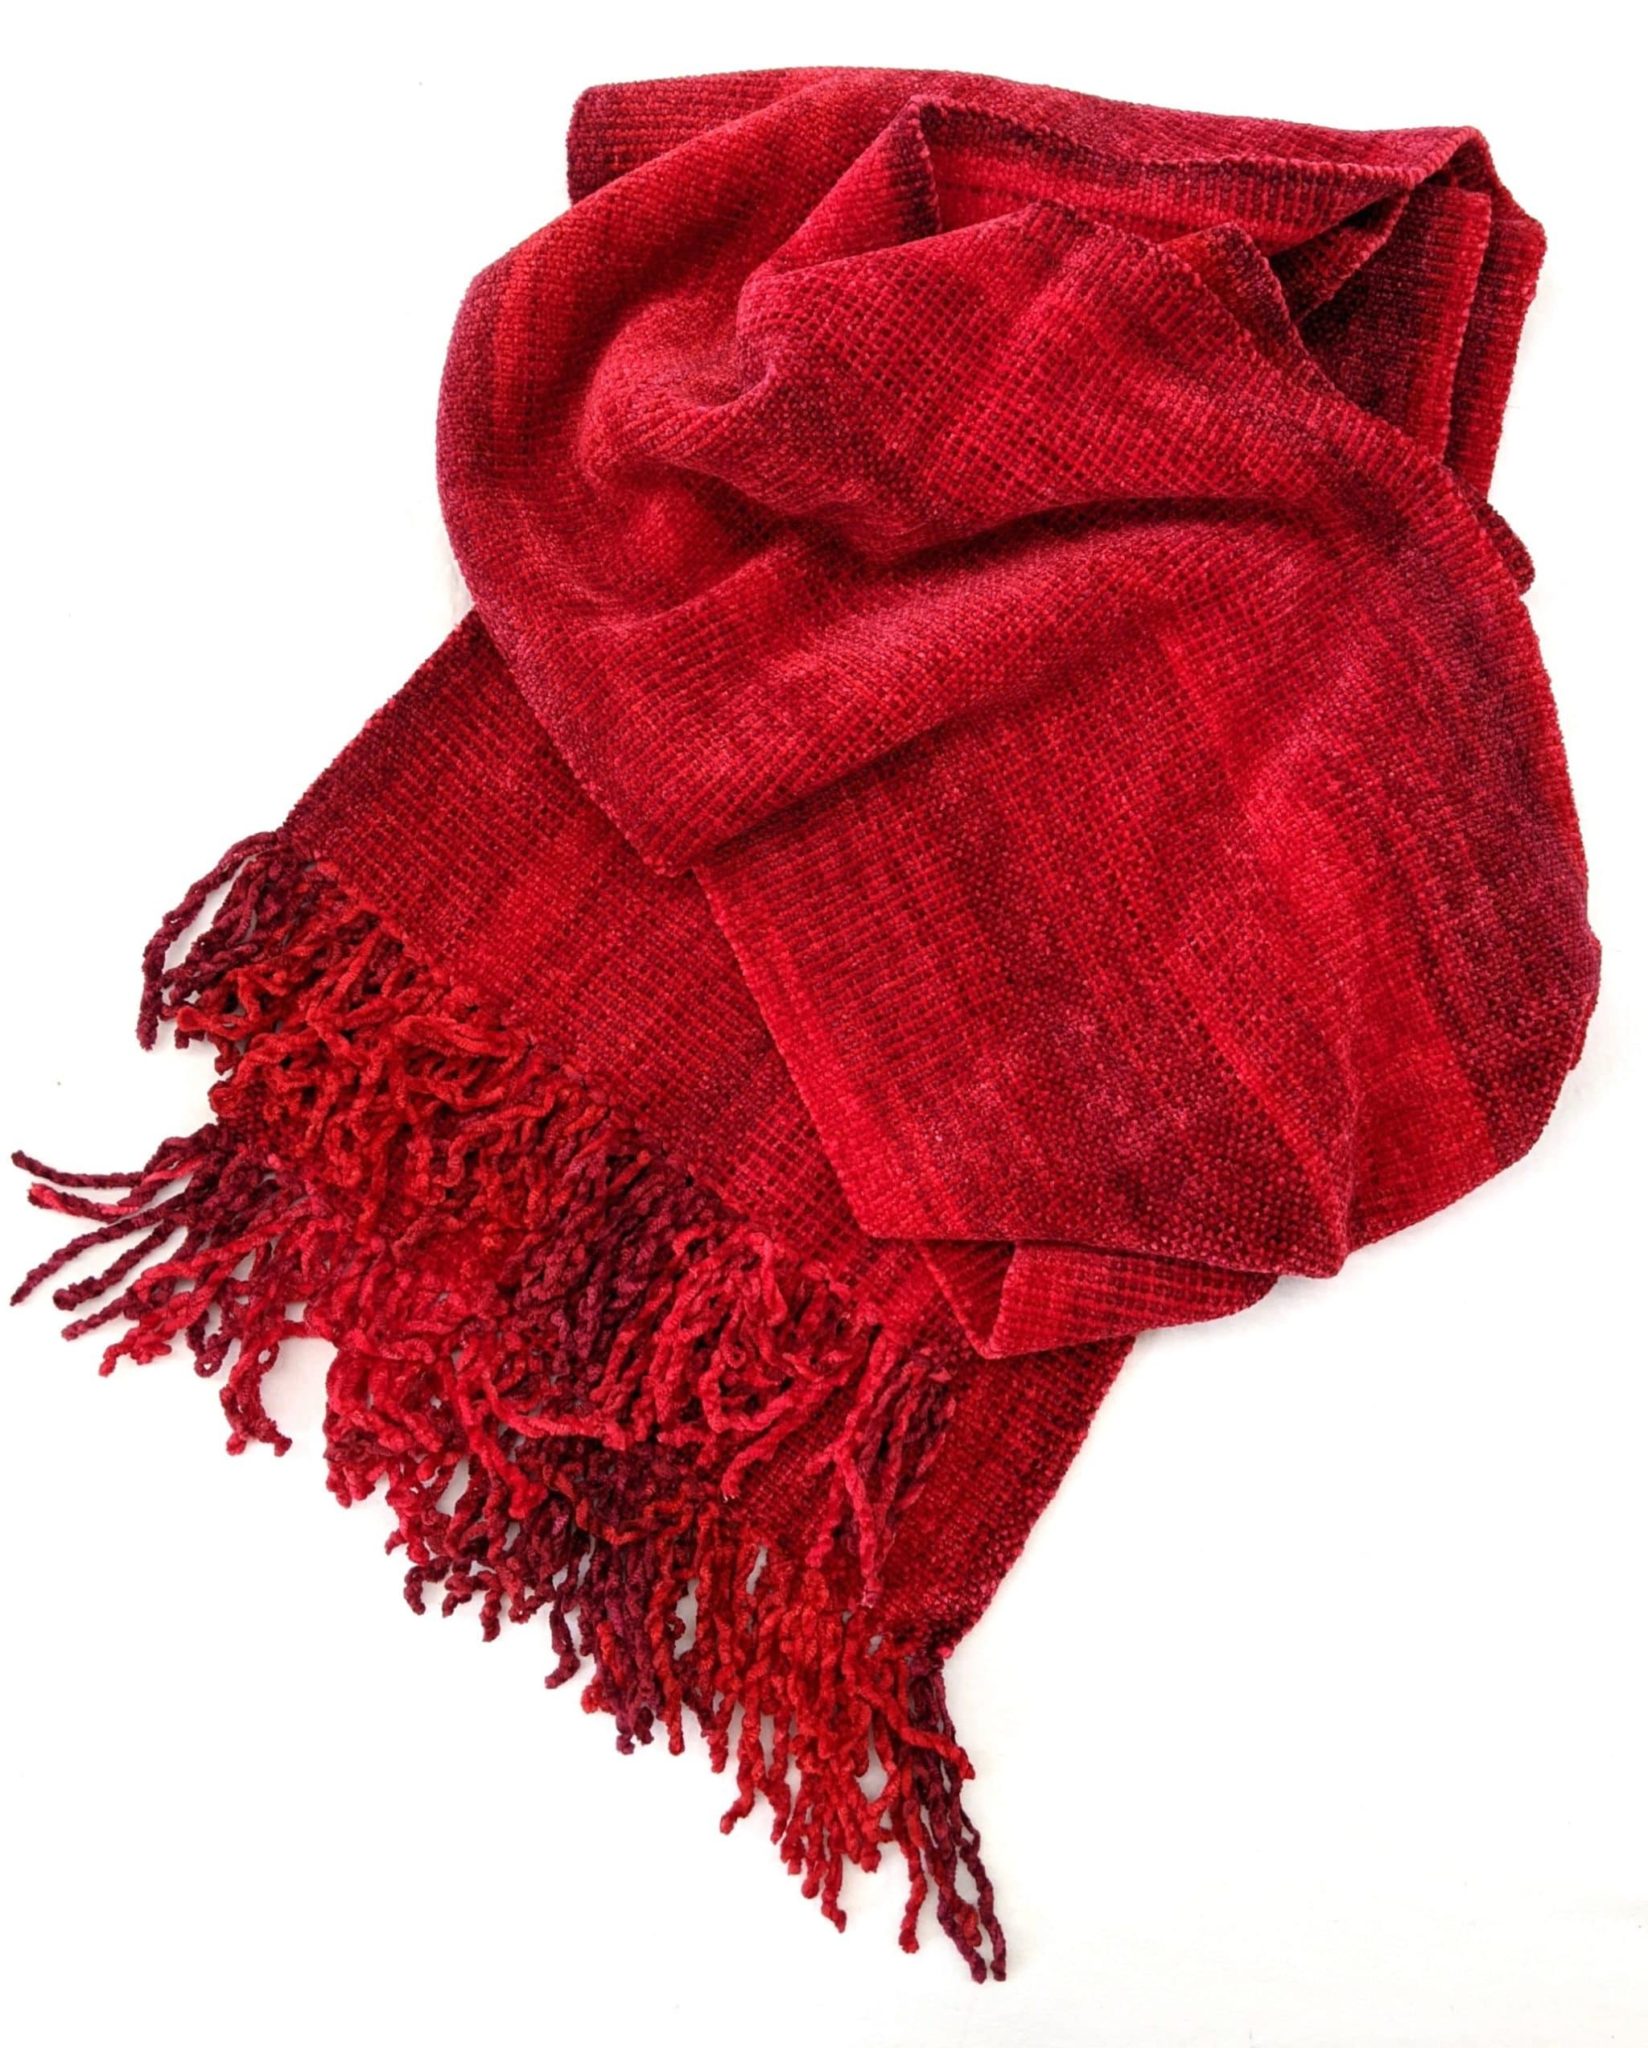 Reds (Bright!) Bamboo Chenille Handwoven Scarf 8 x 68